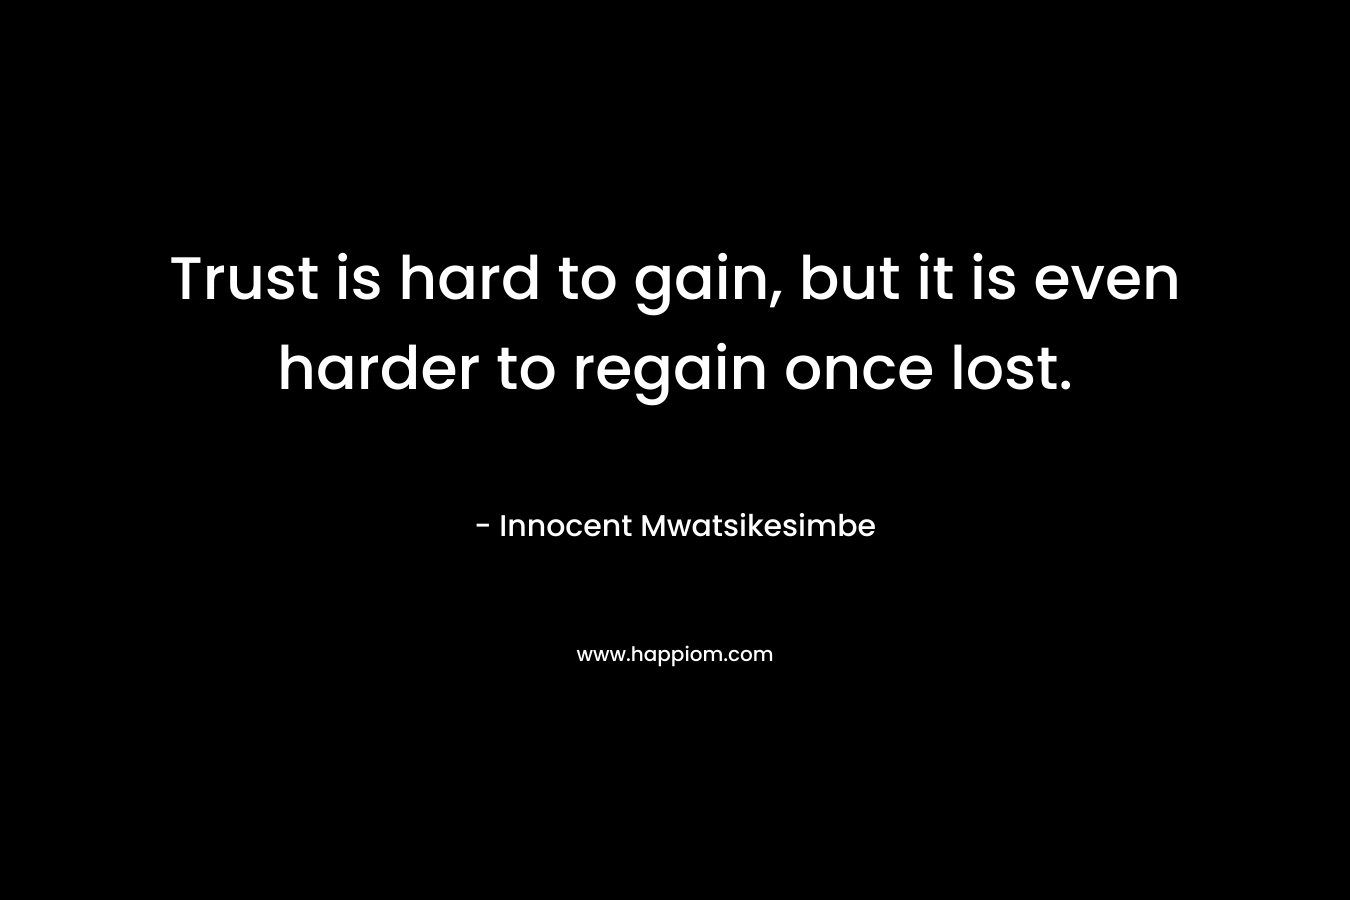 Trust is hard to gain, but it is even harder to regain once lost.